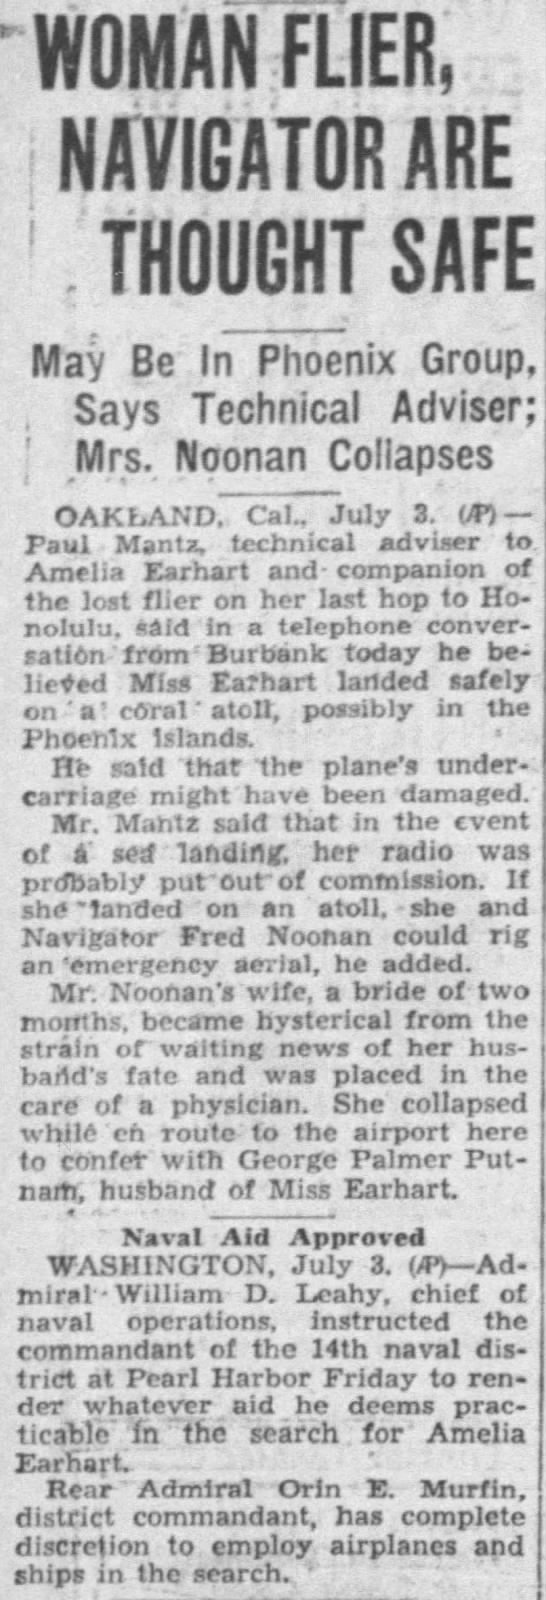 Technical adviser to Amelia Earhart believes Earhart and Noonan are safe after lost communication - 